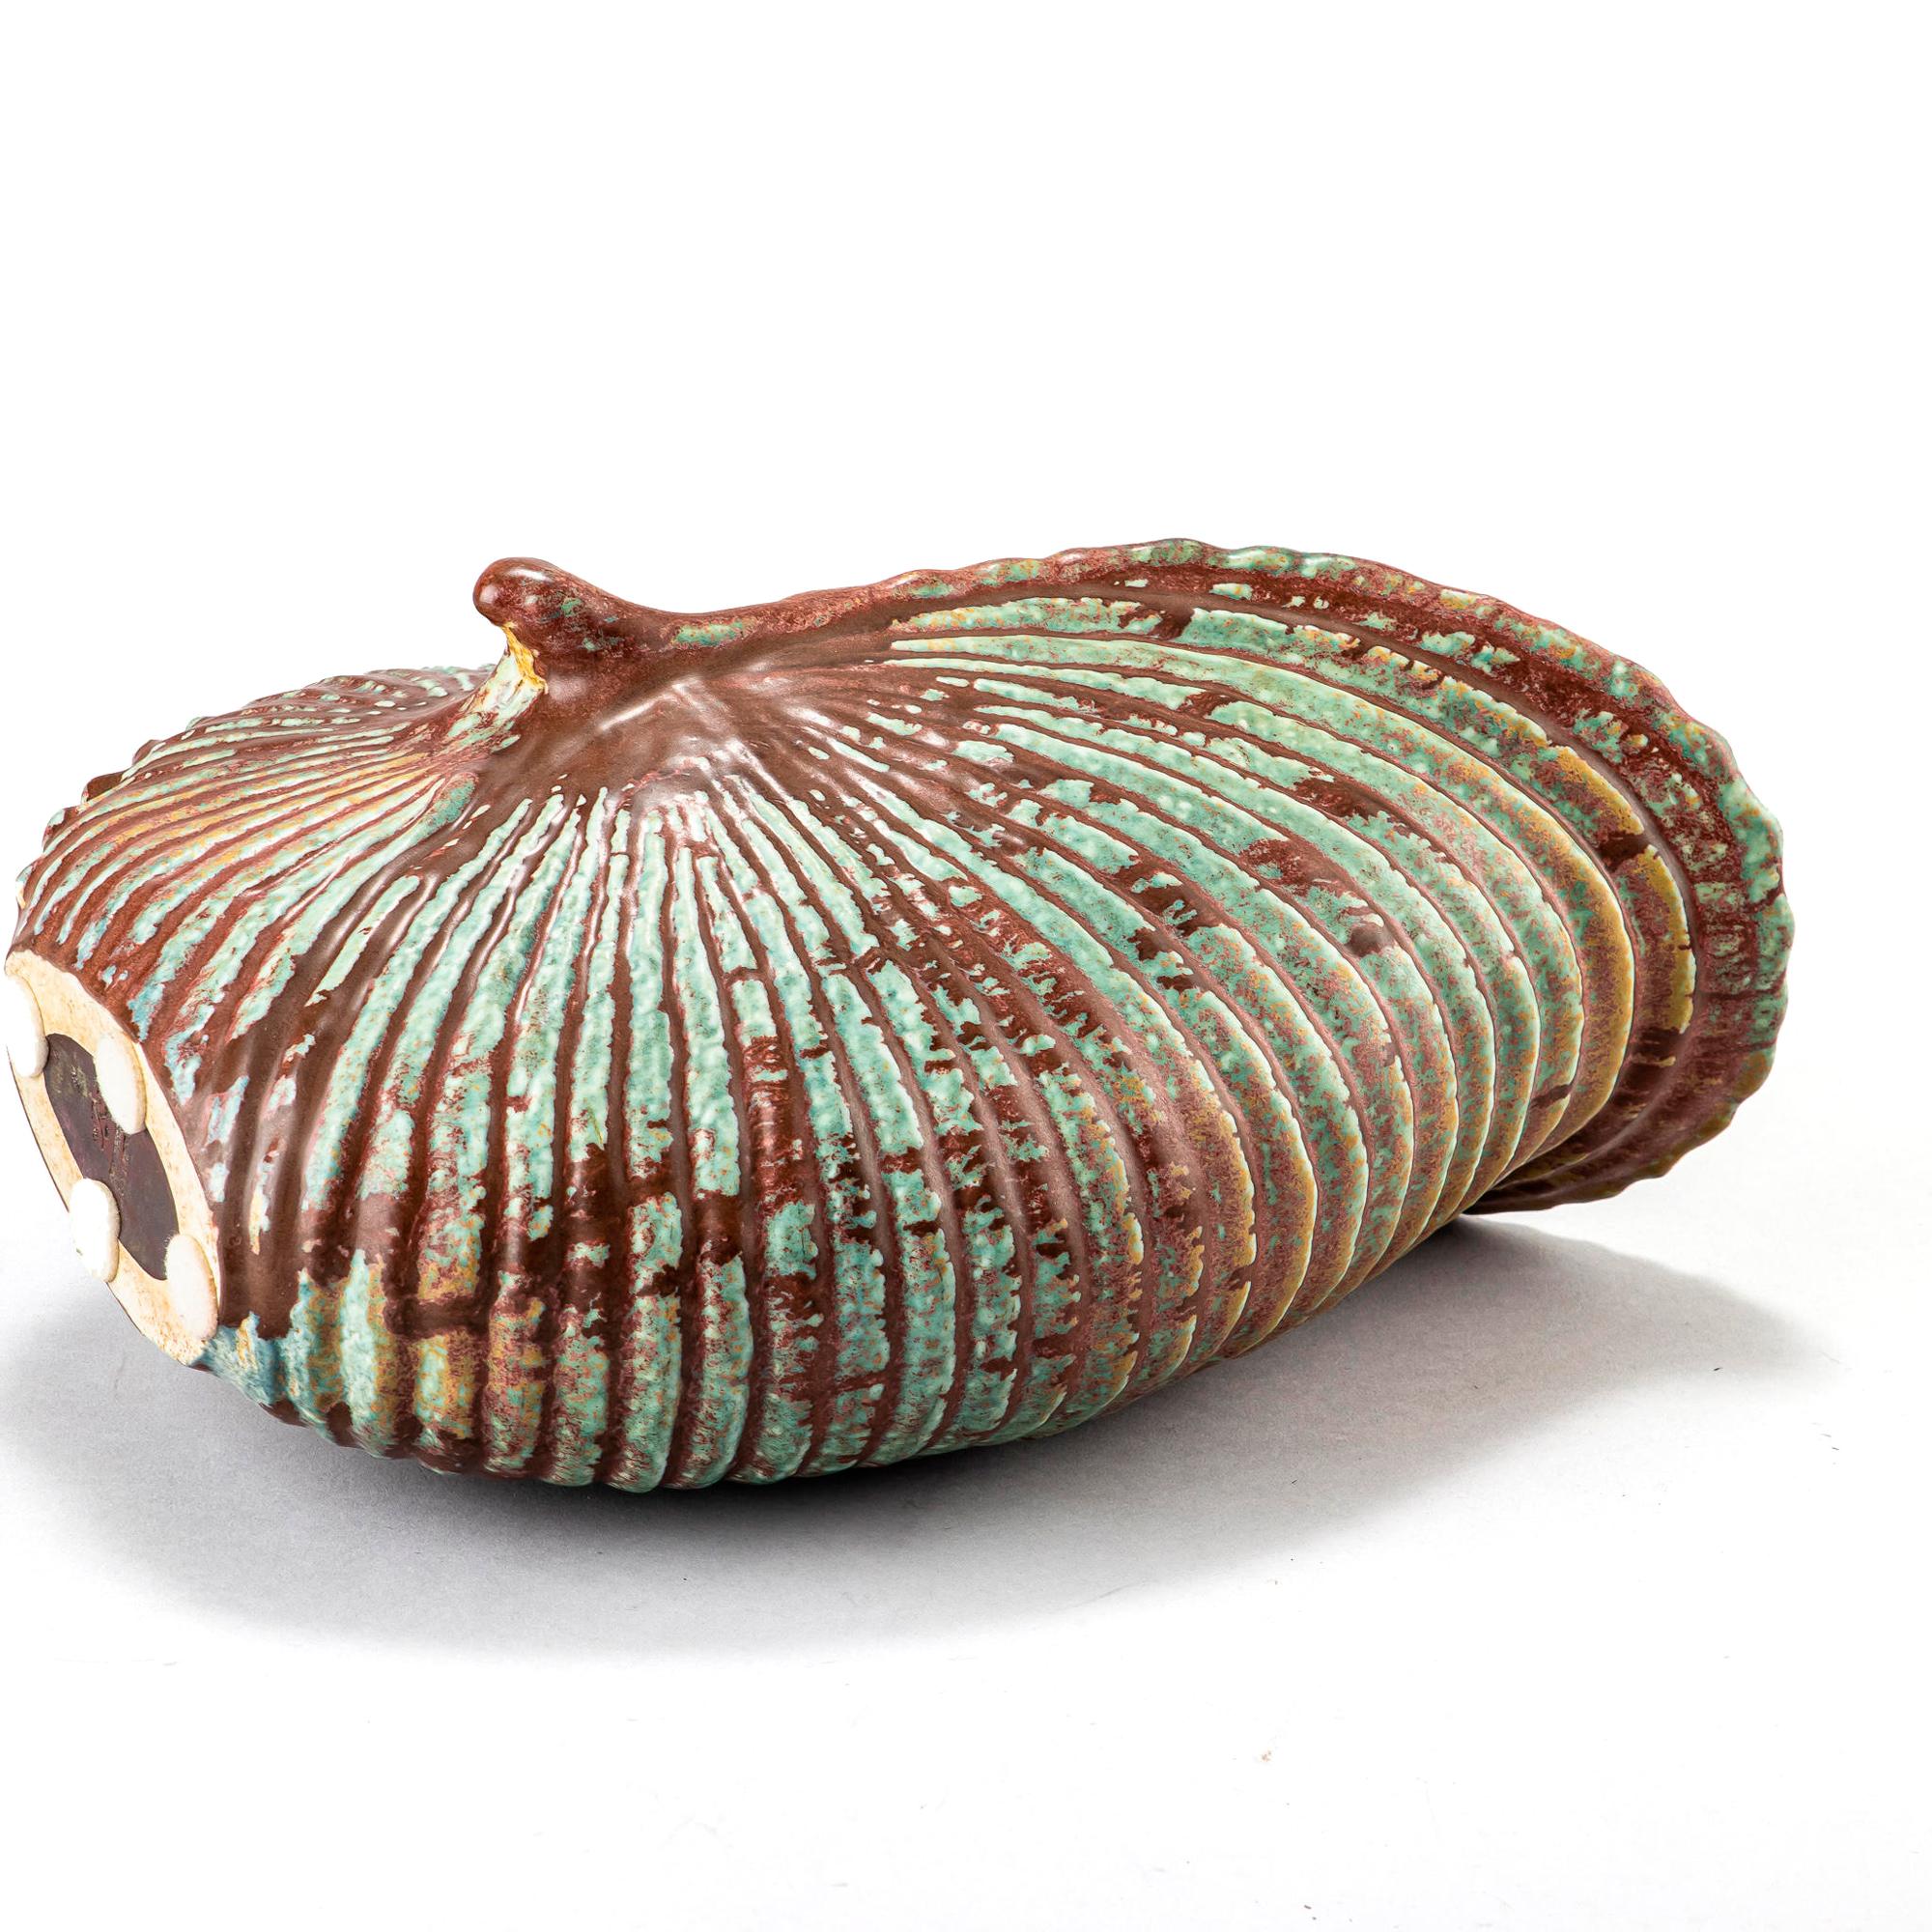 Hand-Crafted Scandinavian Modern Shell Sculpture by Gunnar Nylund  for Rörstrand, 1930s For Sale